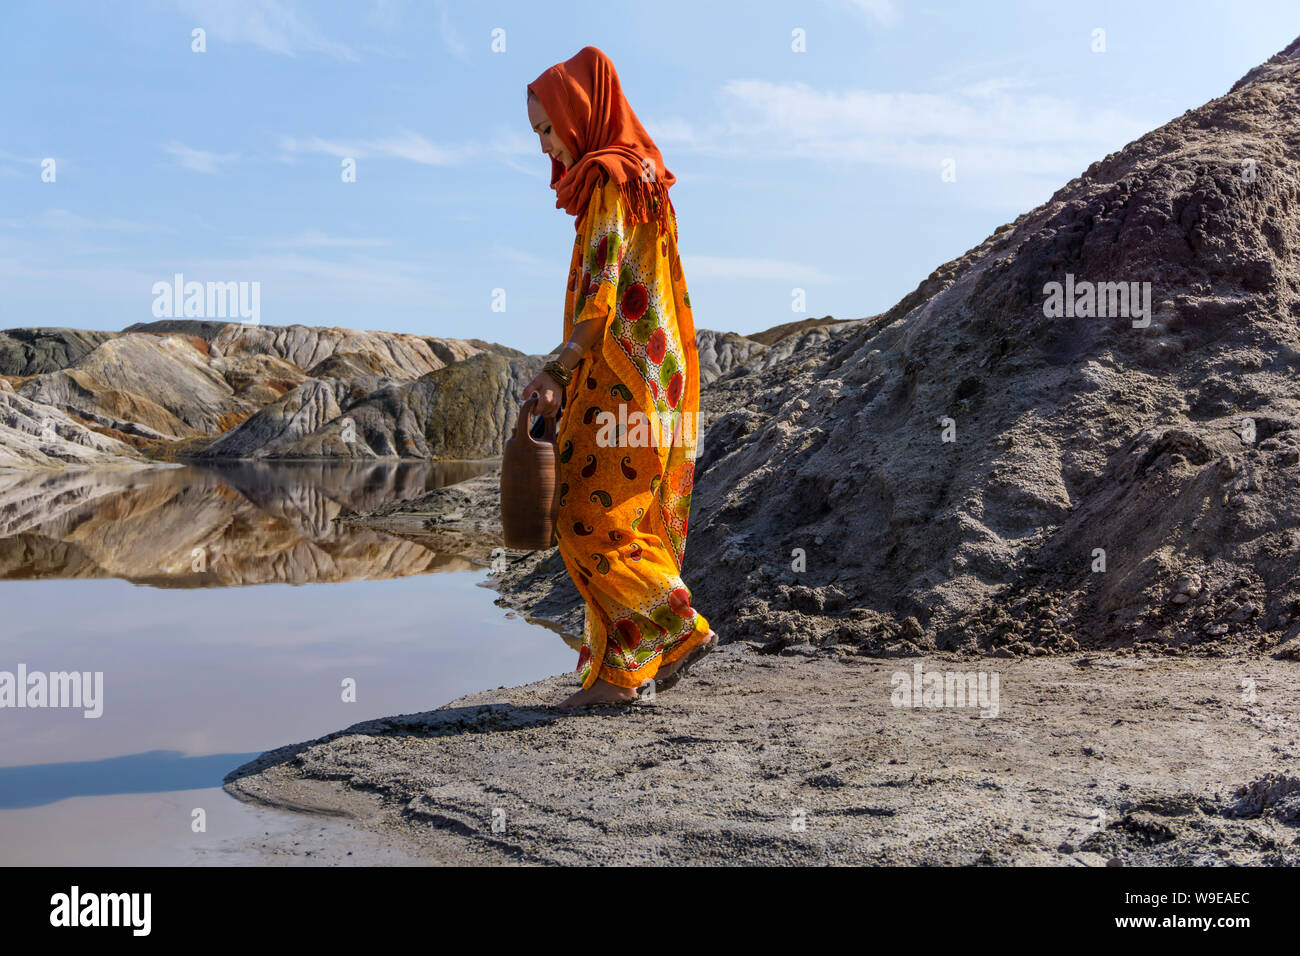 girl of oriental appearance in a sari and hijab with a jug by the lake in the desert Stock Photo